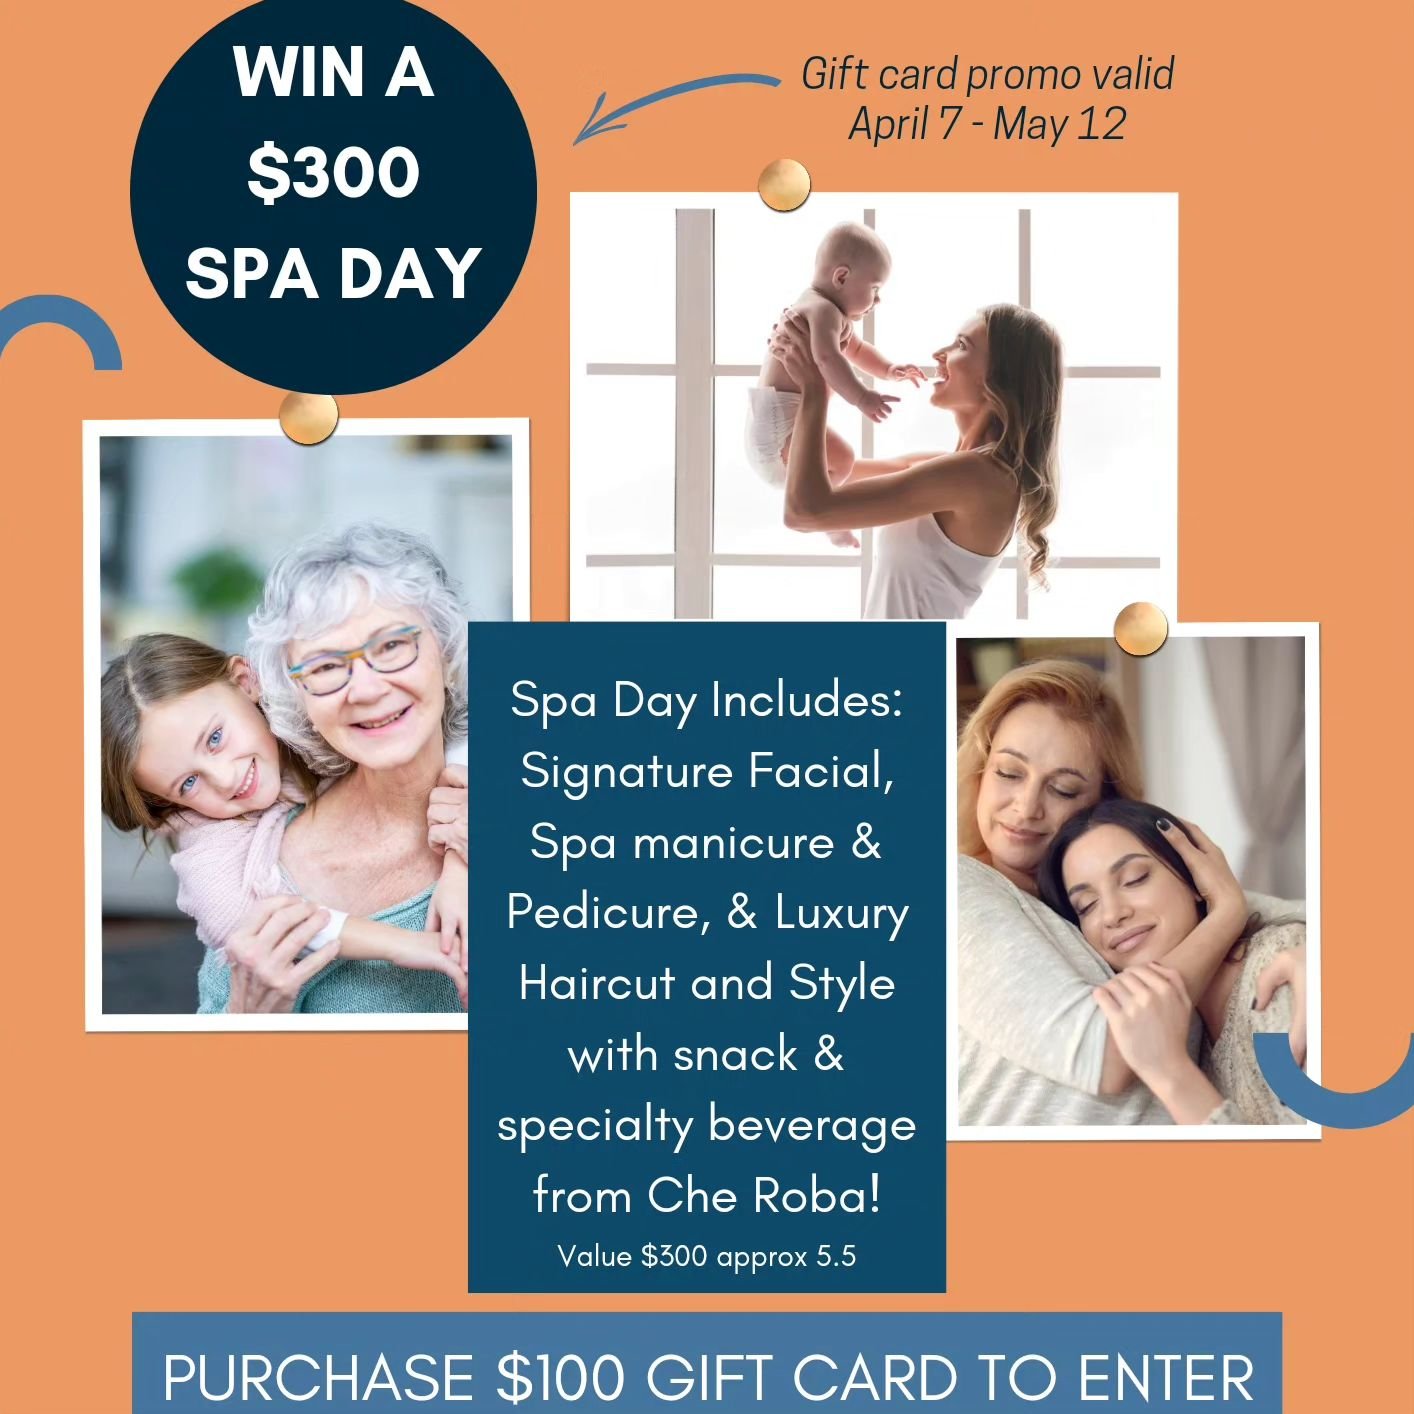 She's the reason we're here! Let's give her some much needed relaxation!  We what to help!! Buy a $100 gift card, and you're automatically entered into our draw for a chance to WIN a $300 Spa Day!! With some yummy treats from our neighbour's @cheroba